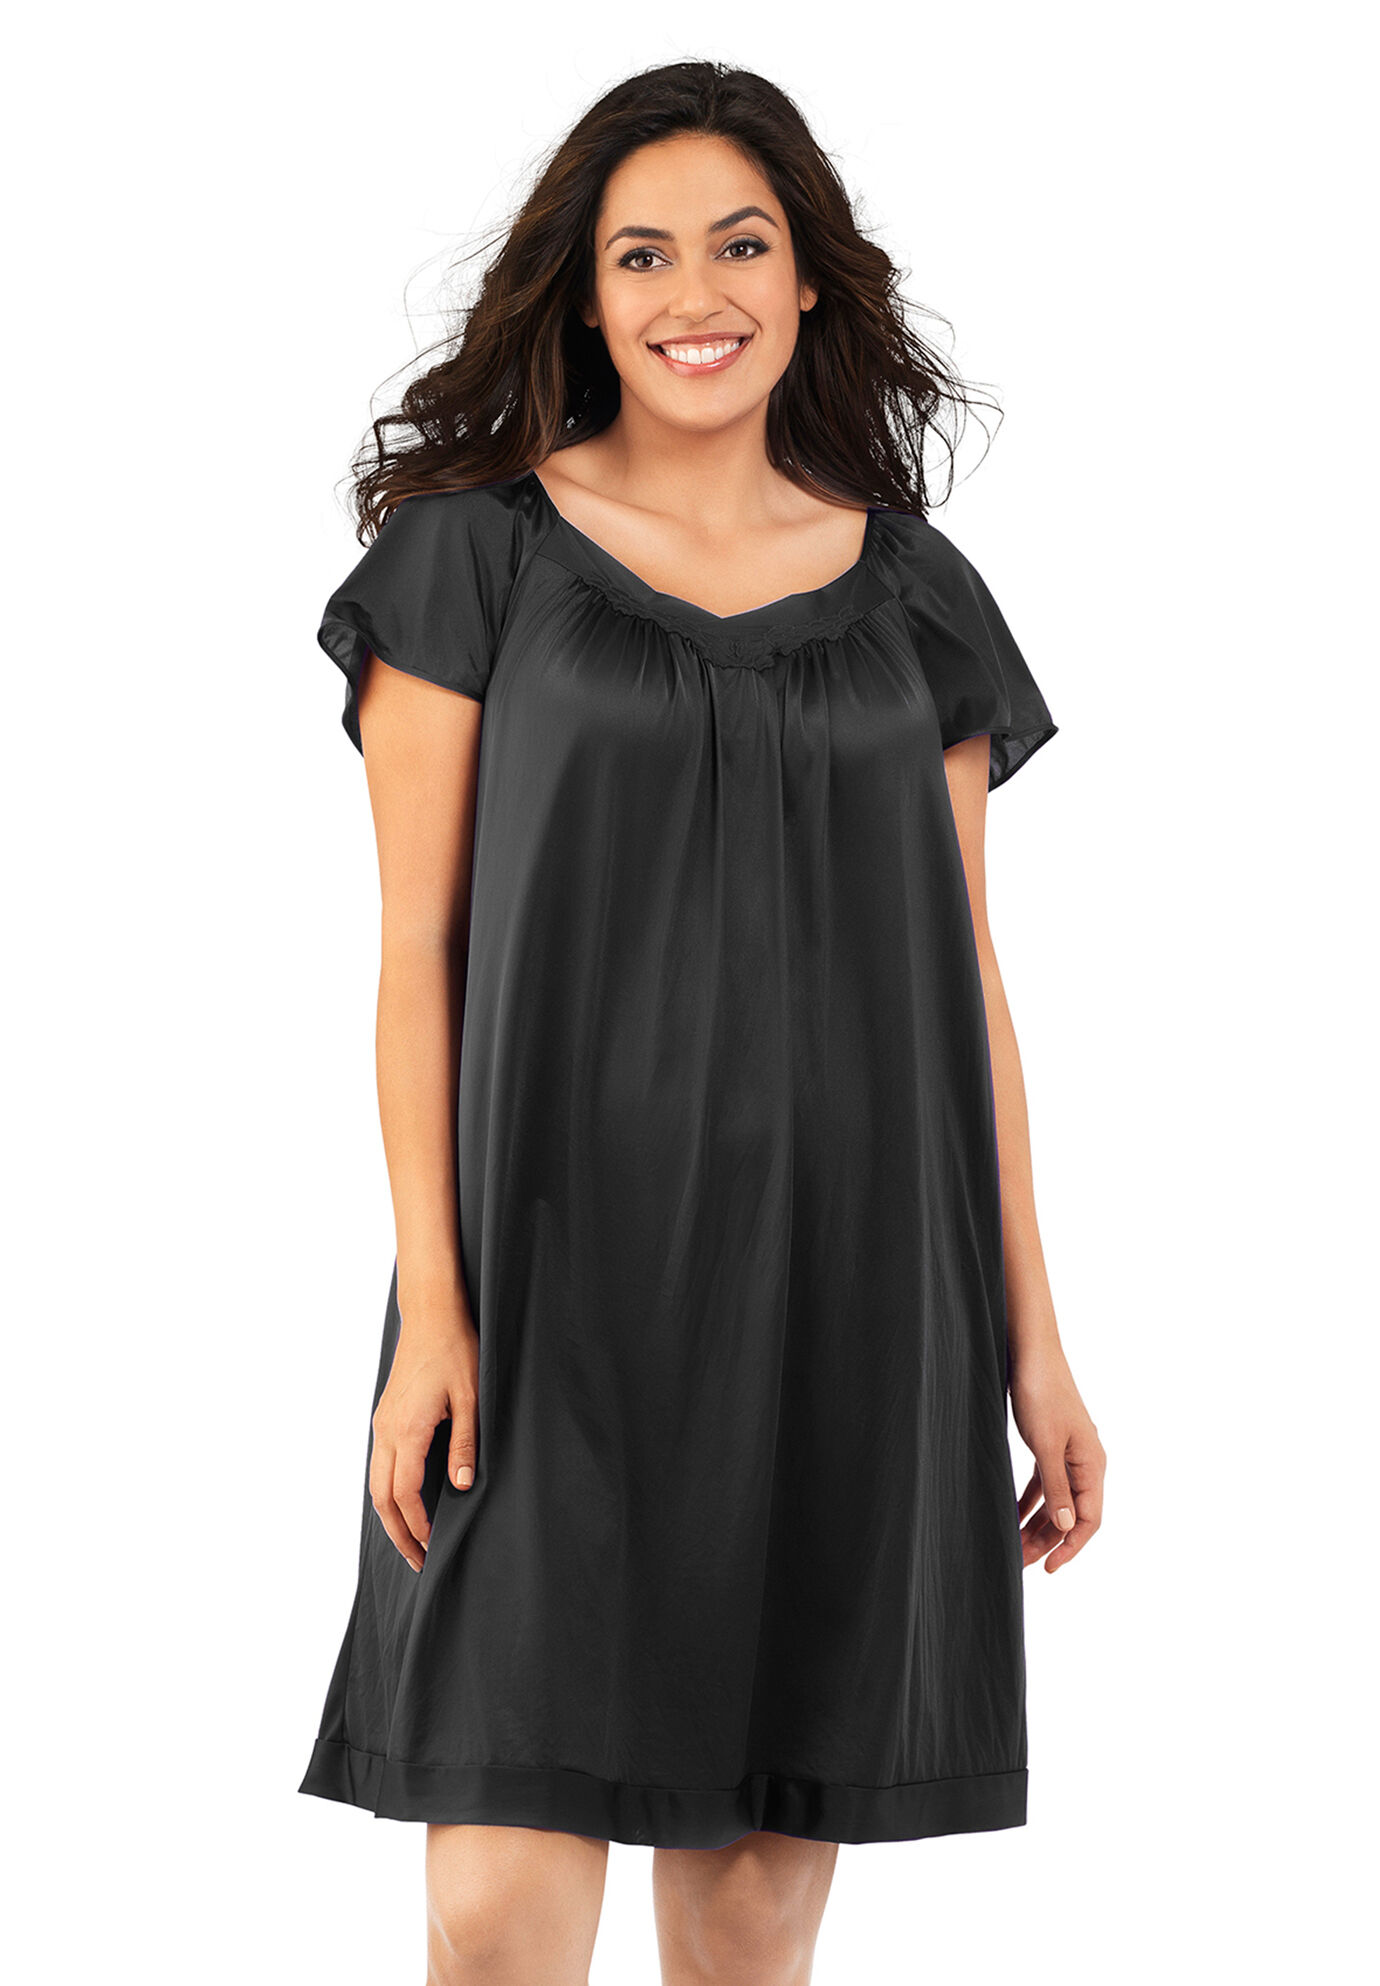 Plus Size Women's Exquisite Form®Flutter Sleeve Sleep Gown by Exquisite Form in Midnight Black (Size 2X)